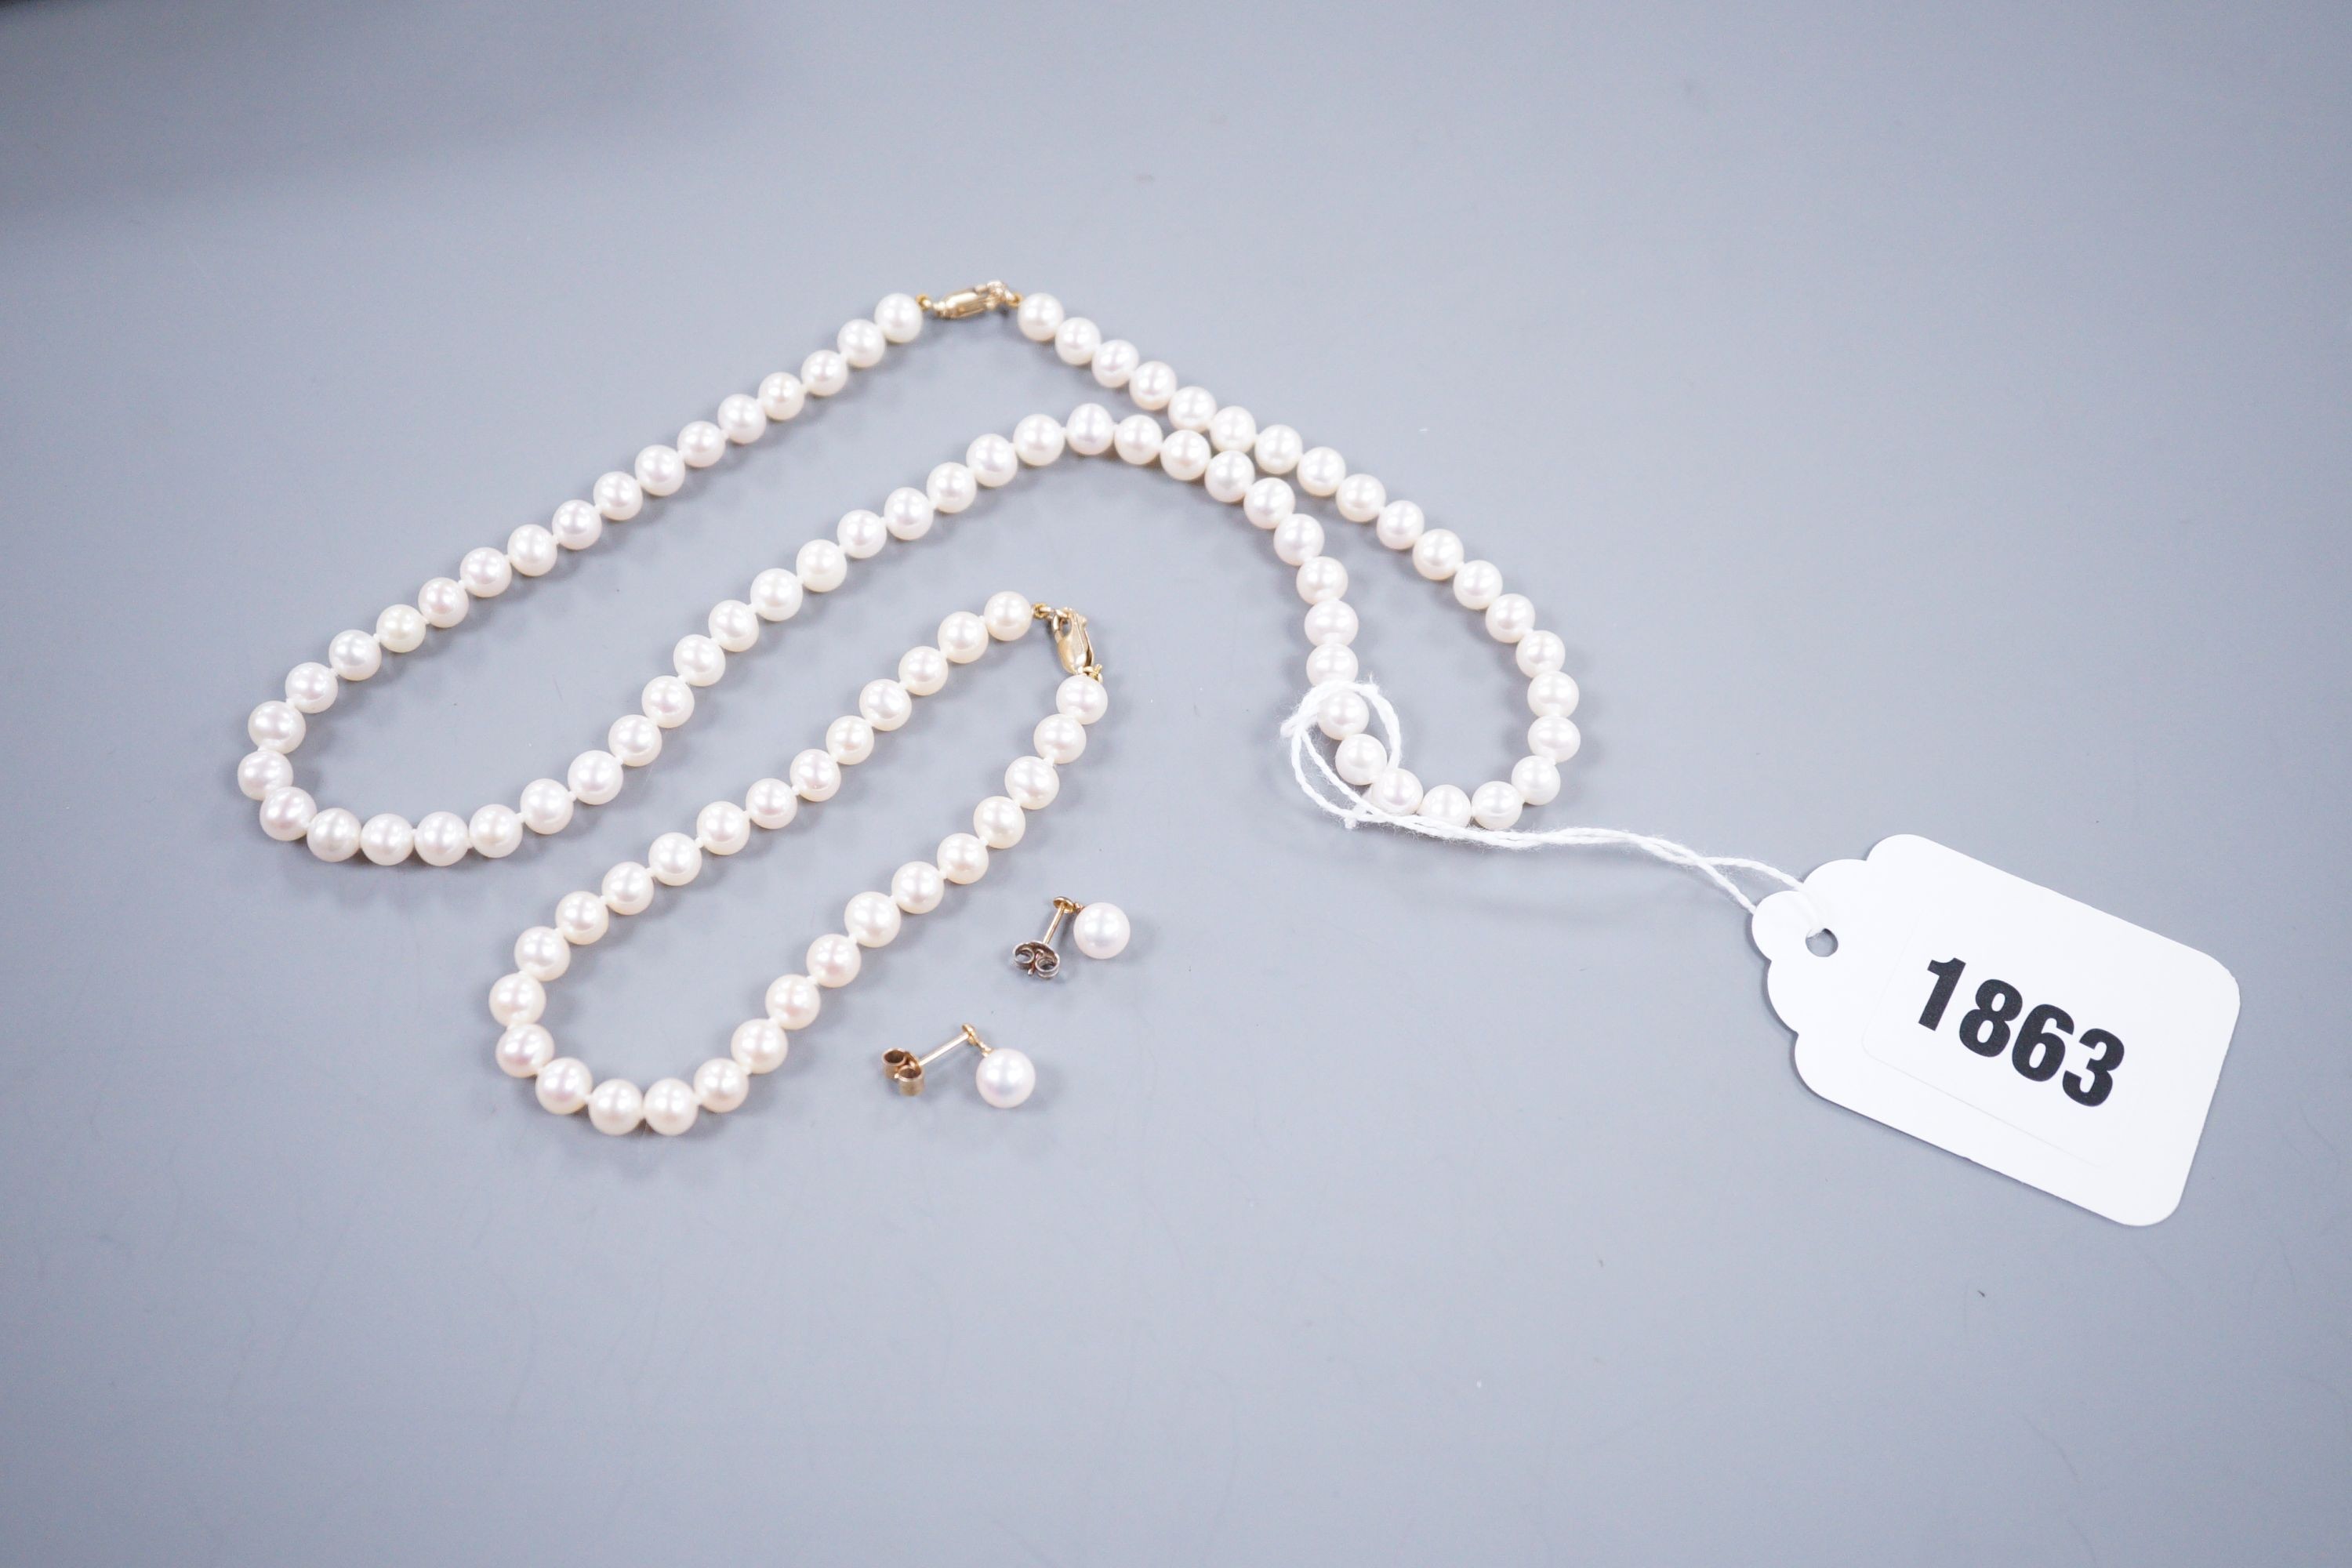 A single strand cultured pearl necklace with matching bracelet and drop earrings - Image 2 of 2